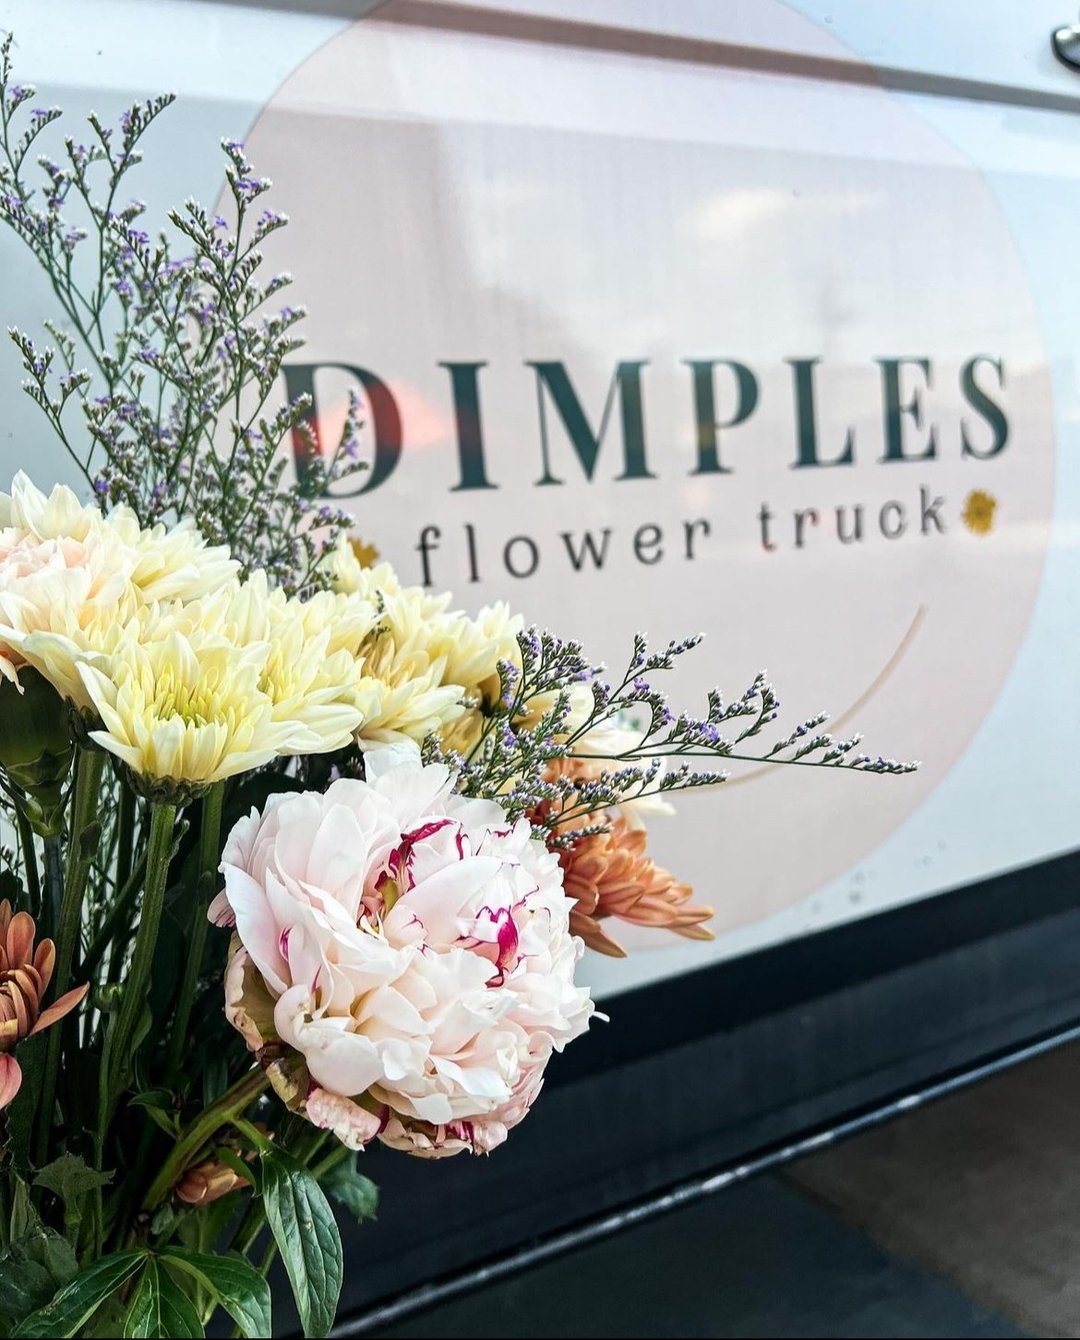 Get ready for a blooming good time! @DimplesFlowershop  Truck is popping up today at 11 AM - 2 PM, bringing floral delights to The Pizitz. Plus, mark your calendars for July 11th when they'll be teaching a workshop in The Gallery. Don't miss out on t